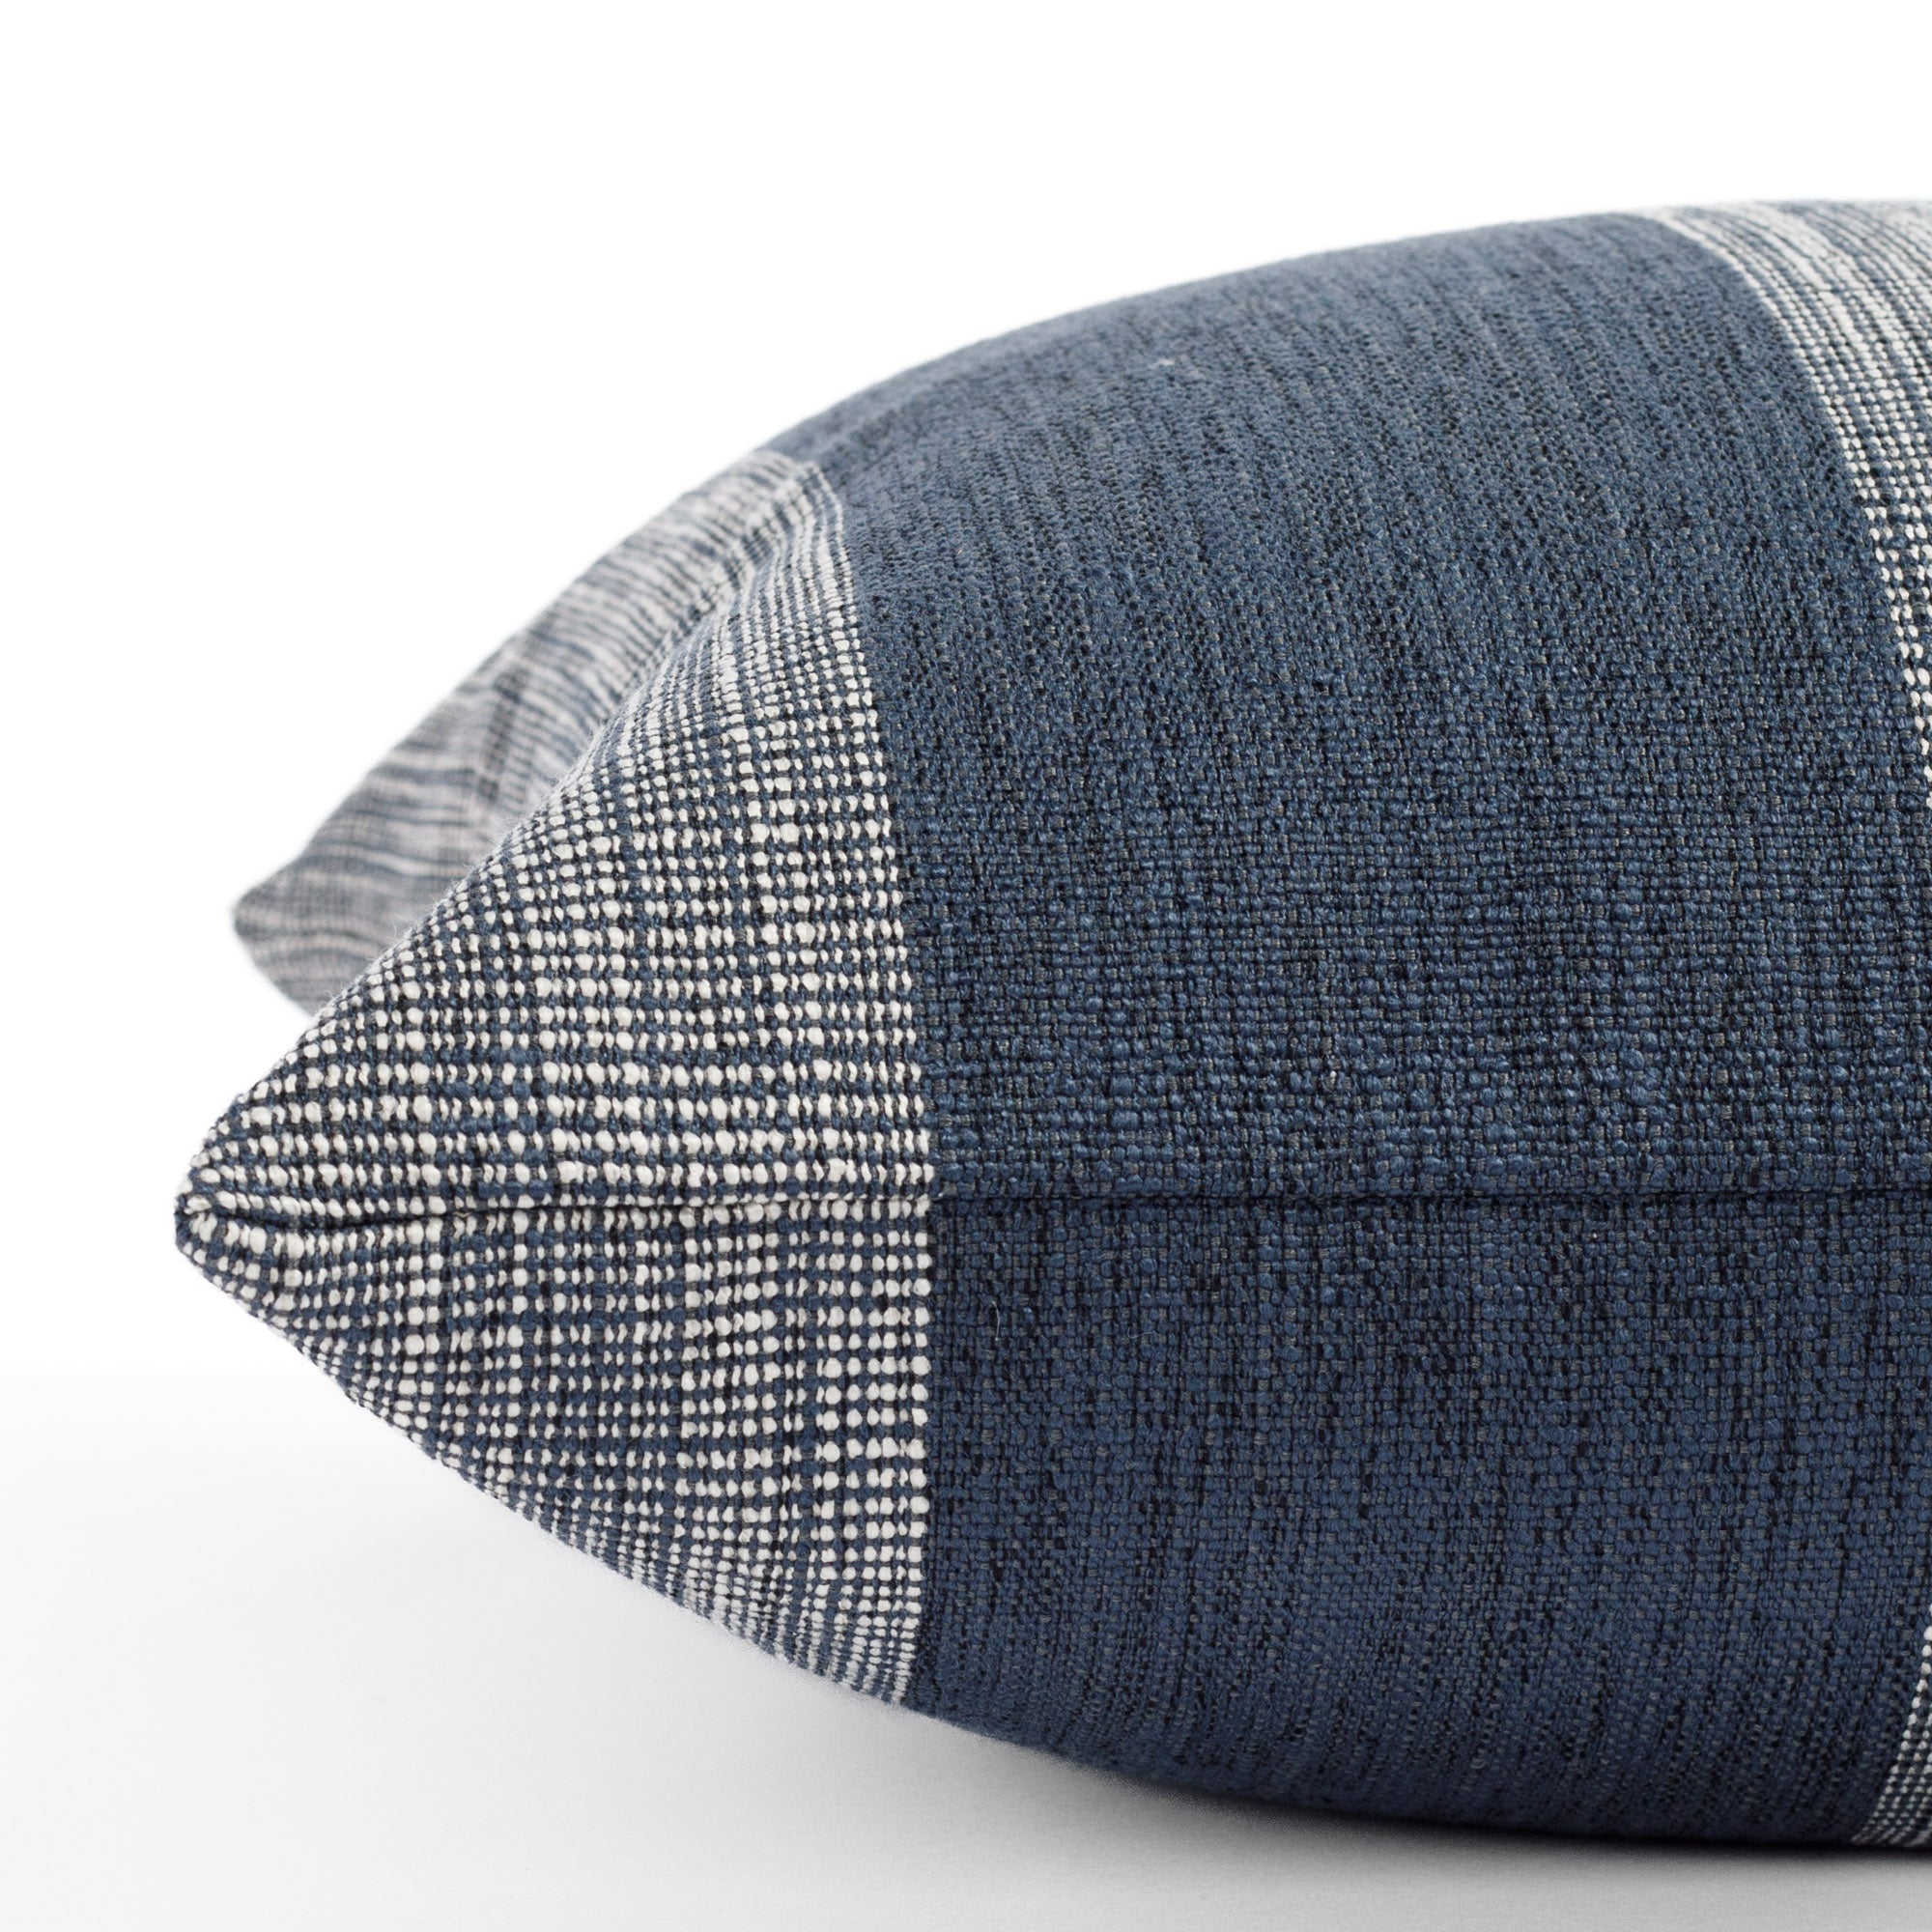 an indigo blue and white striped pillow : close up side view